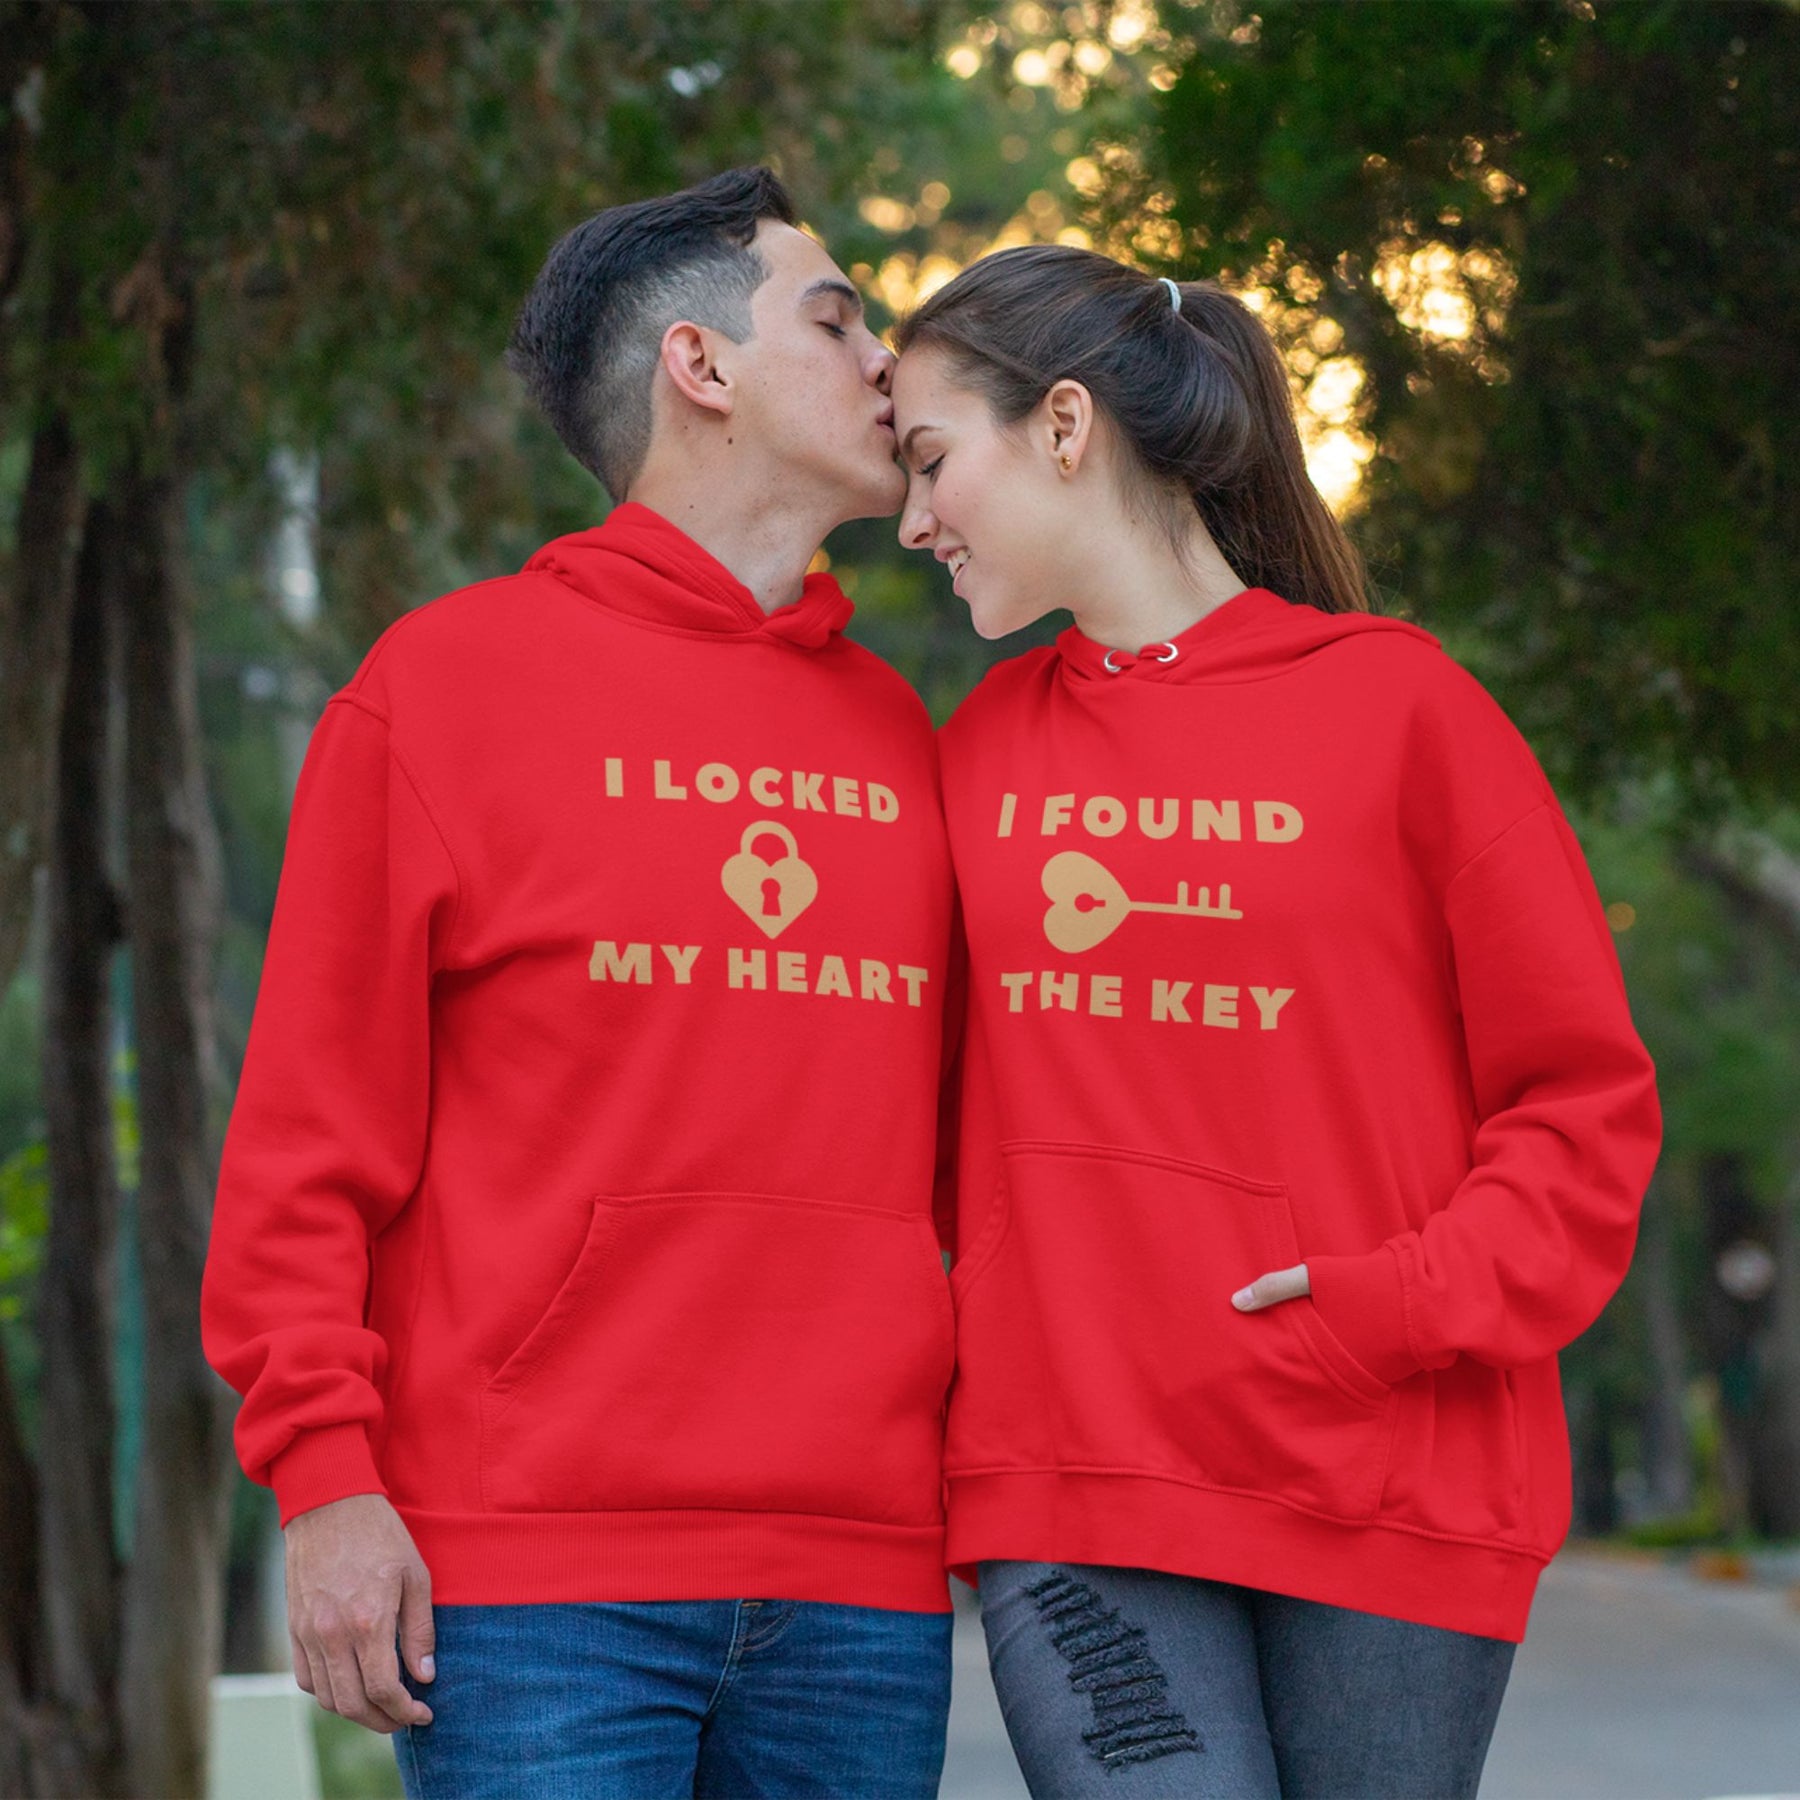 i-locked-my-heart-i-found-the-key-cotton-printed-couple-hoodies-red-gogirgit-com